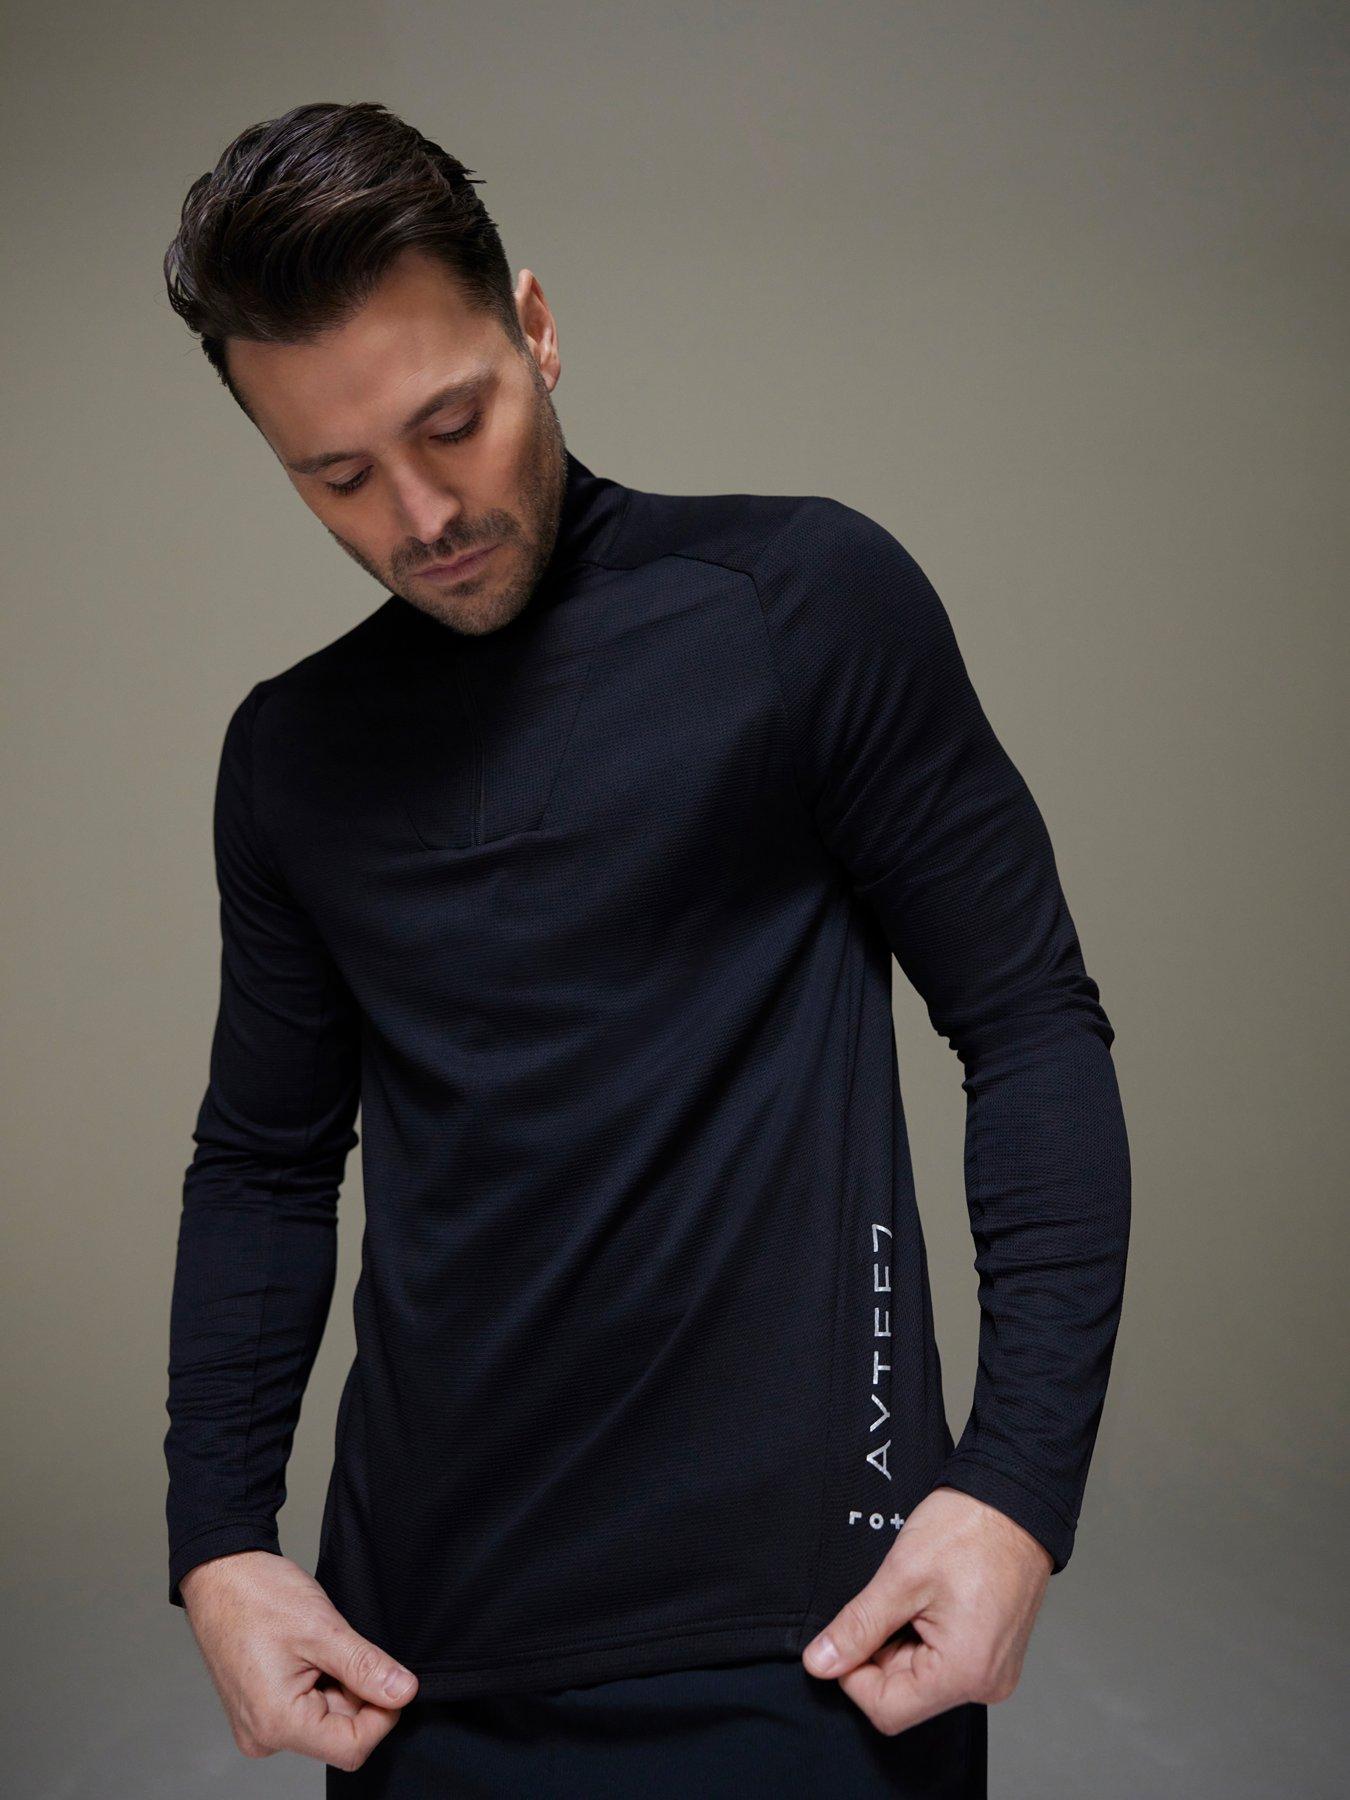 Long Sleeves  Softwear With Stretch Long Sleeve Crew Plus Black